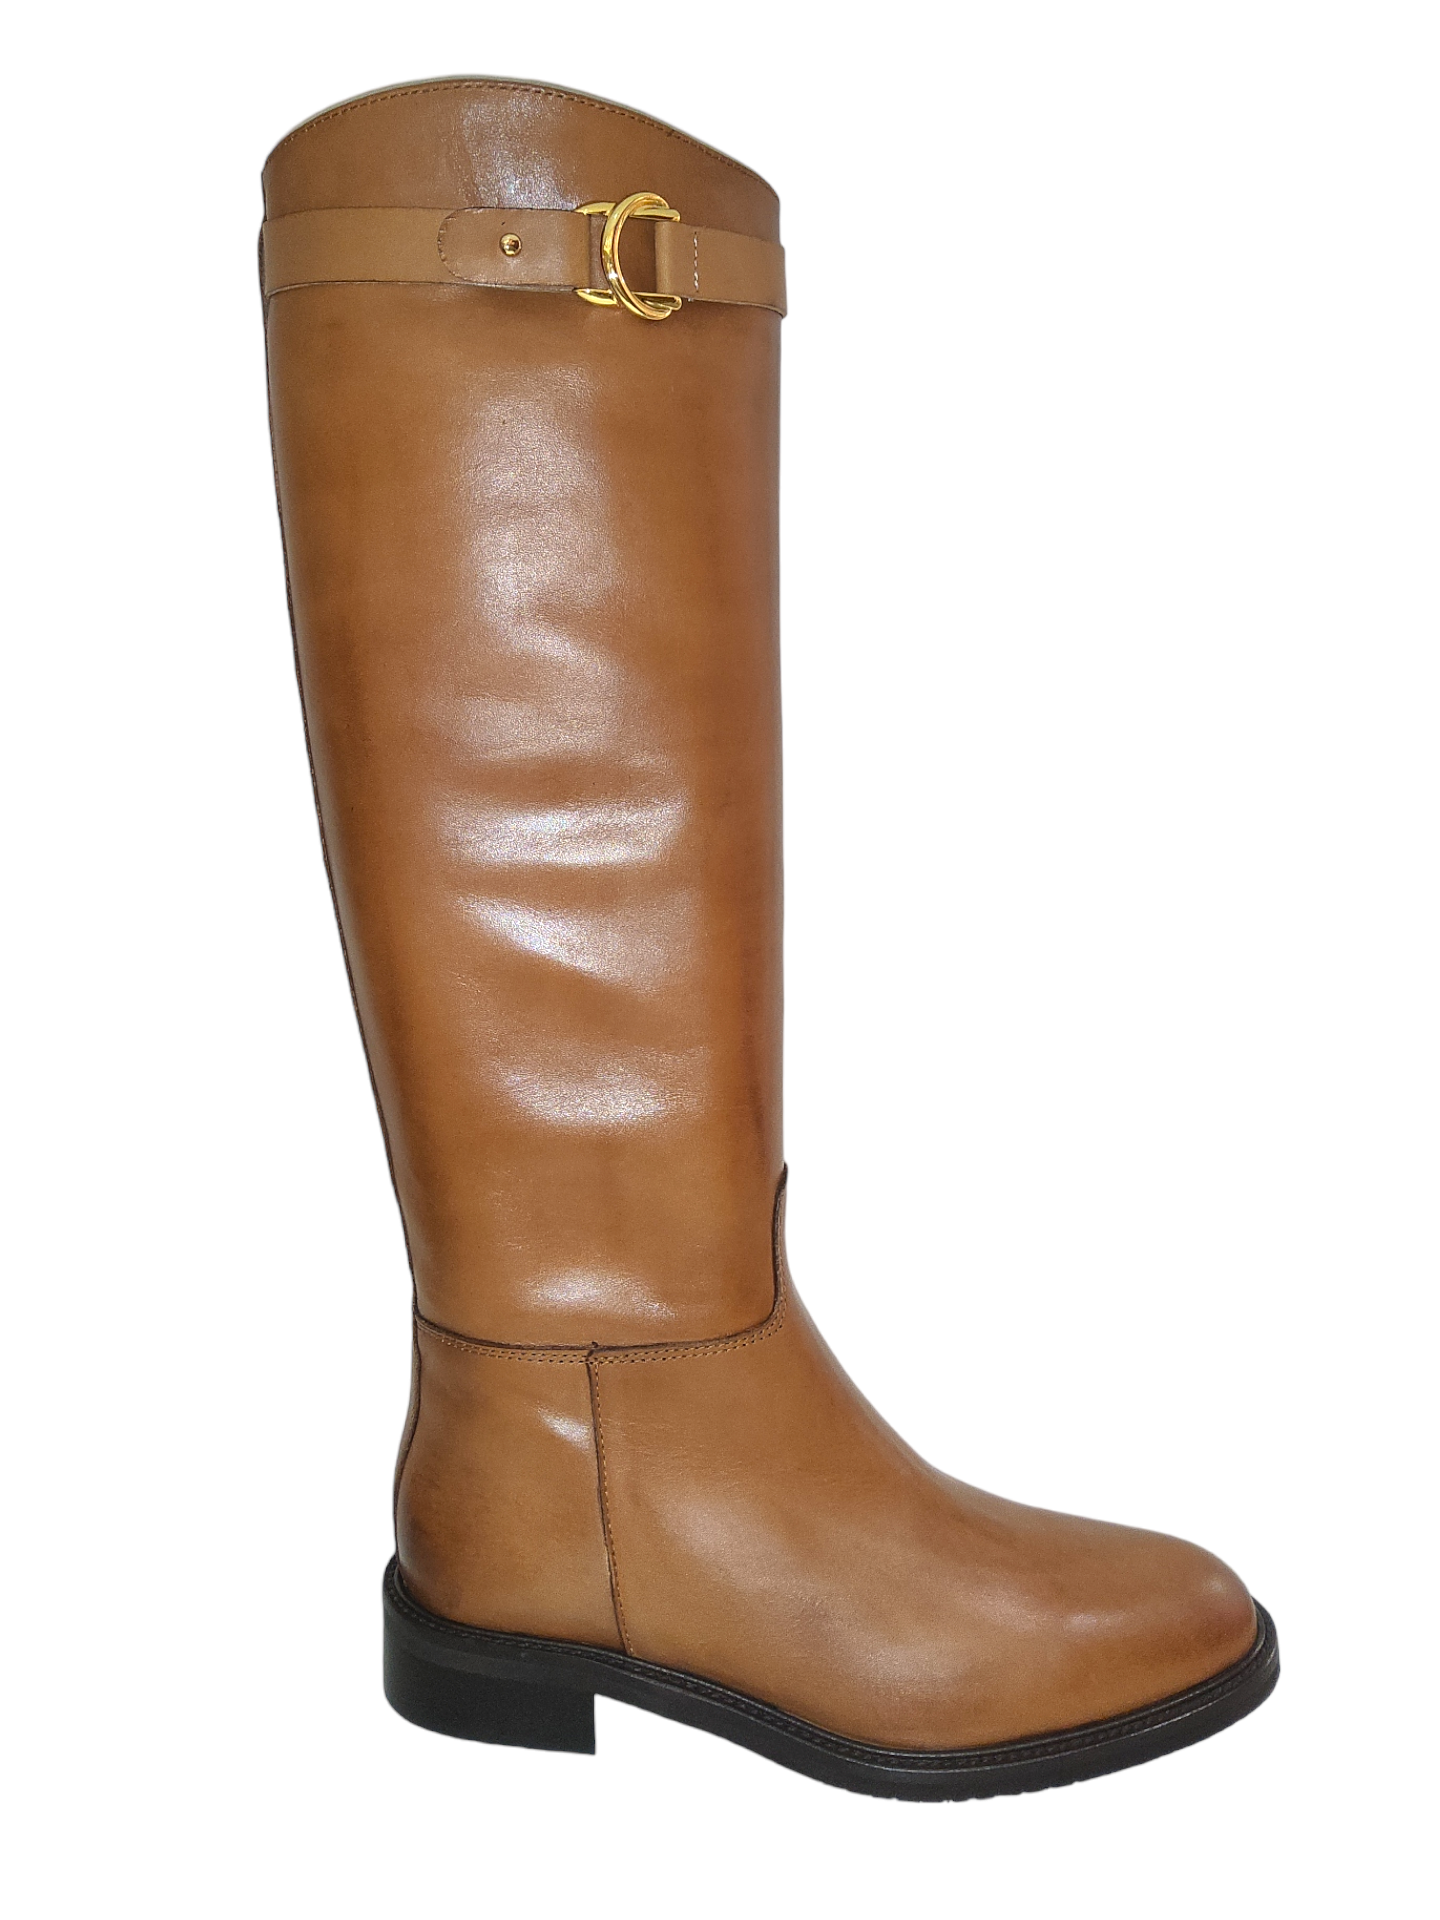 Tan leather knee high boots